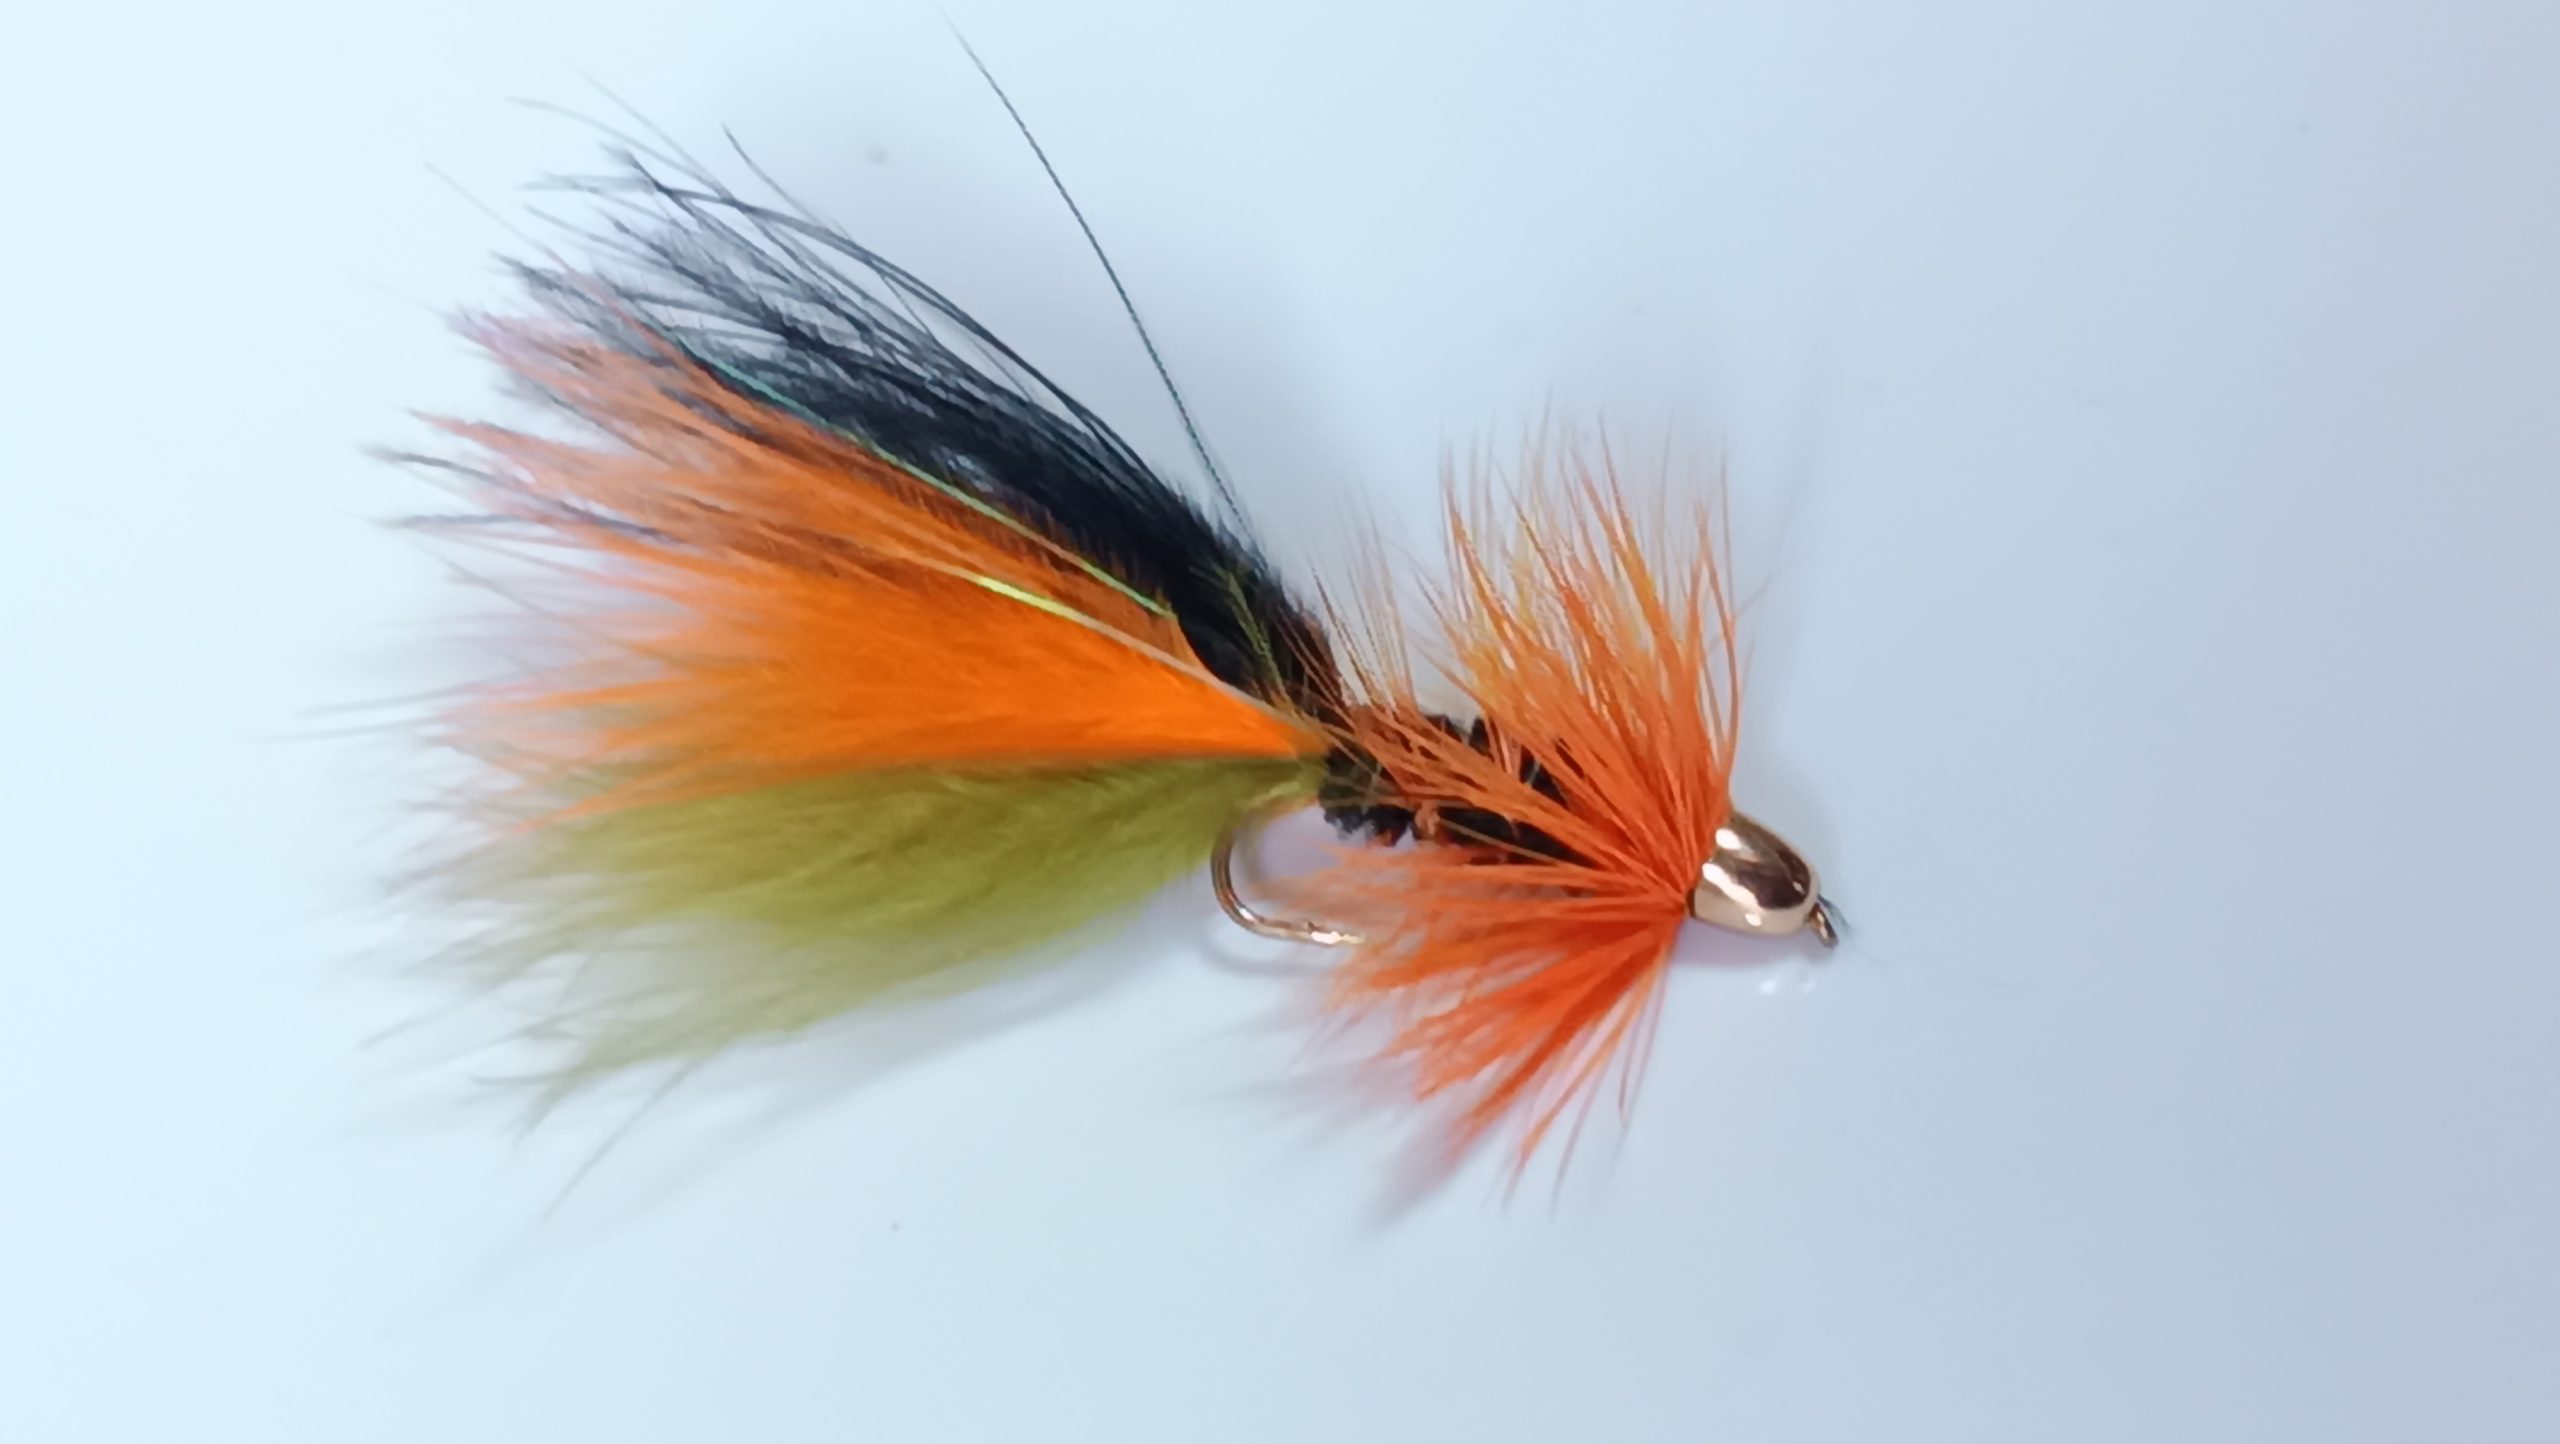 Olive ,orange and black thinmint conehead streamers (price for 12